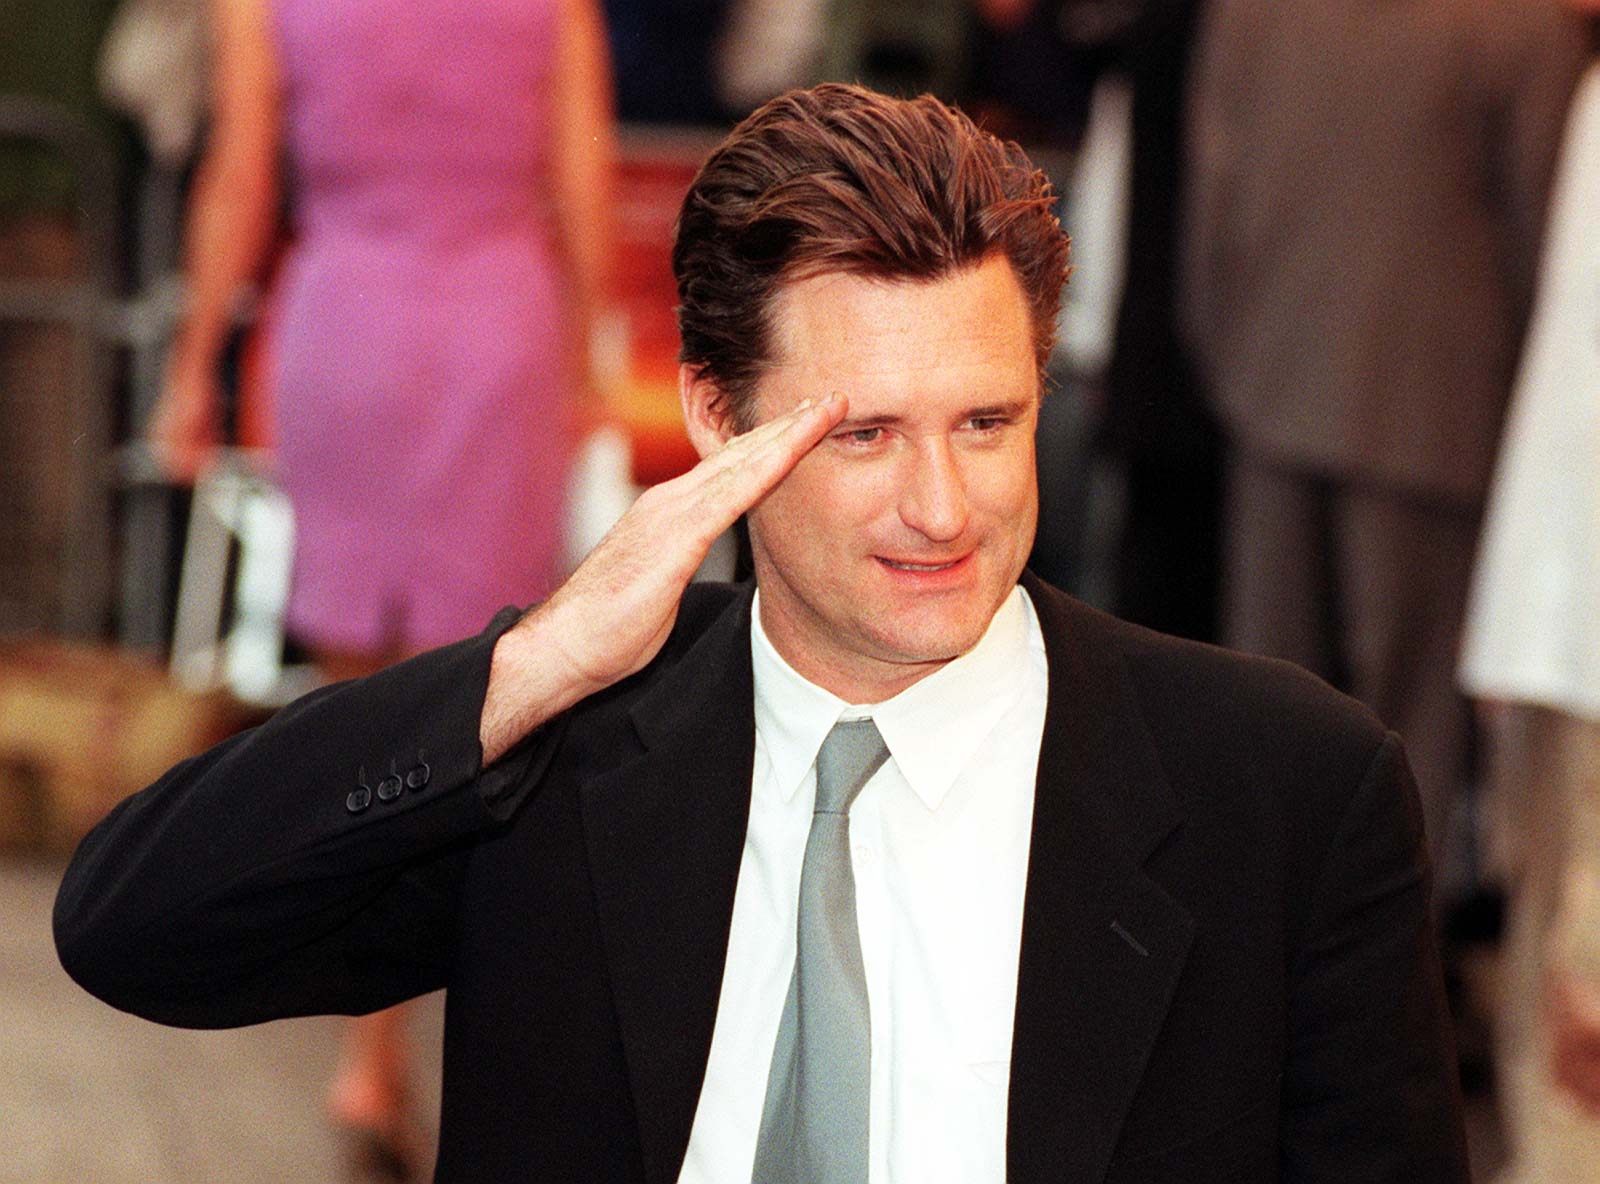 Bill Pullman giving a salute at 'Independence Day' premiere